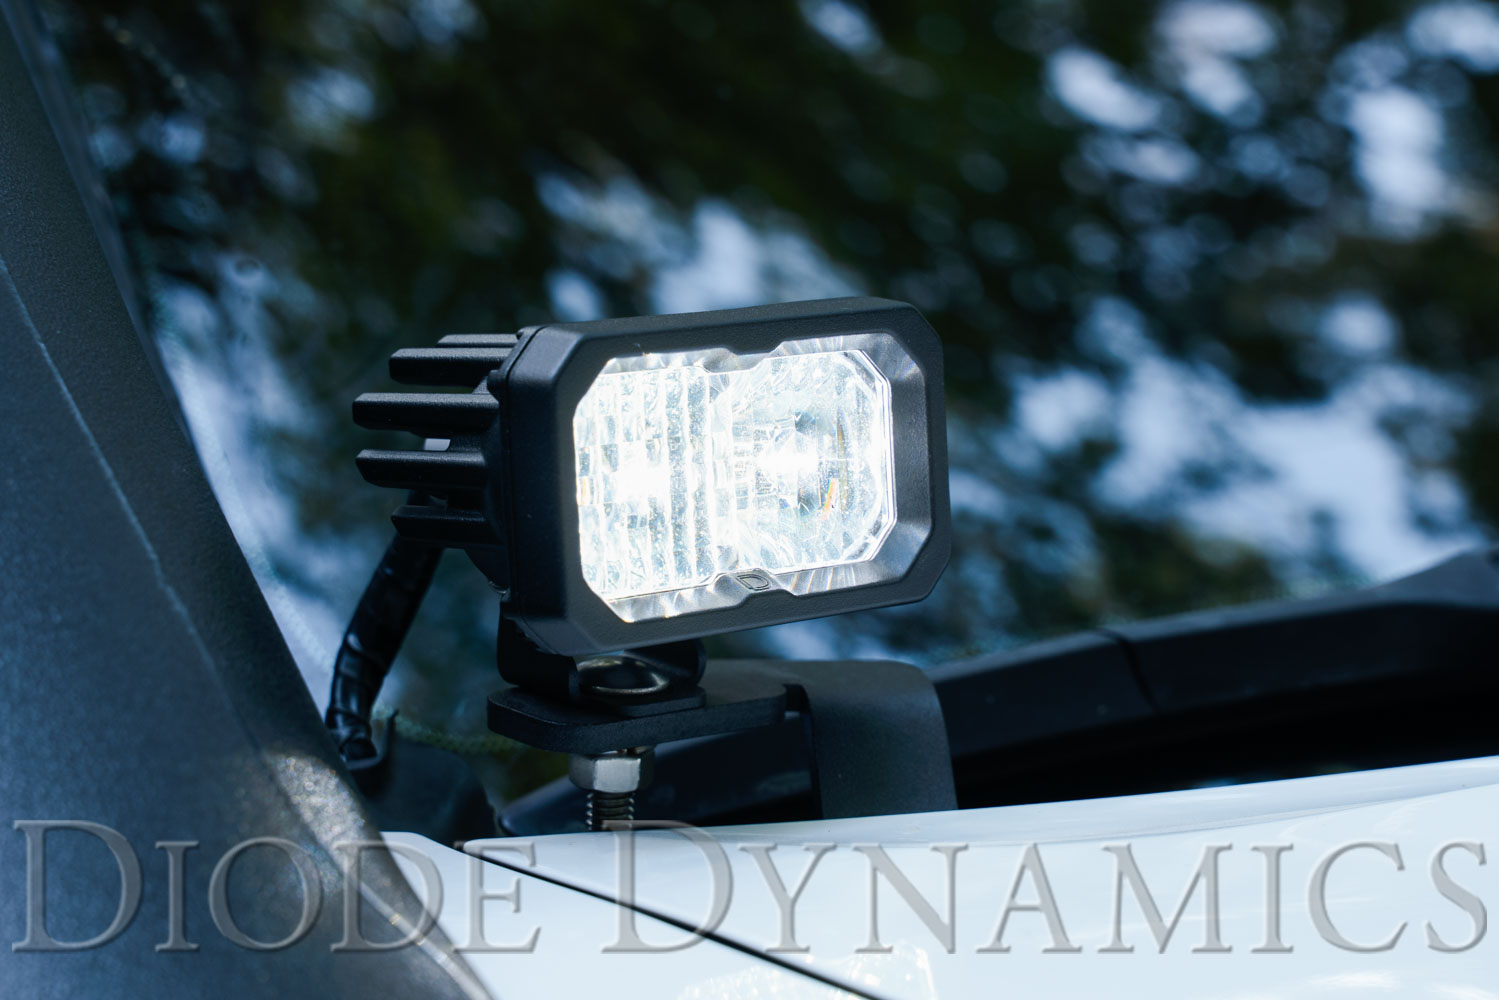 Diode Dynamics Stage Series 2 Inch LED Pod, Sport White Combo Standard ABL Each